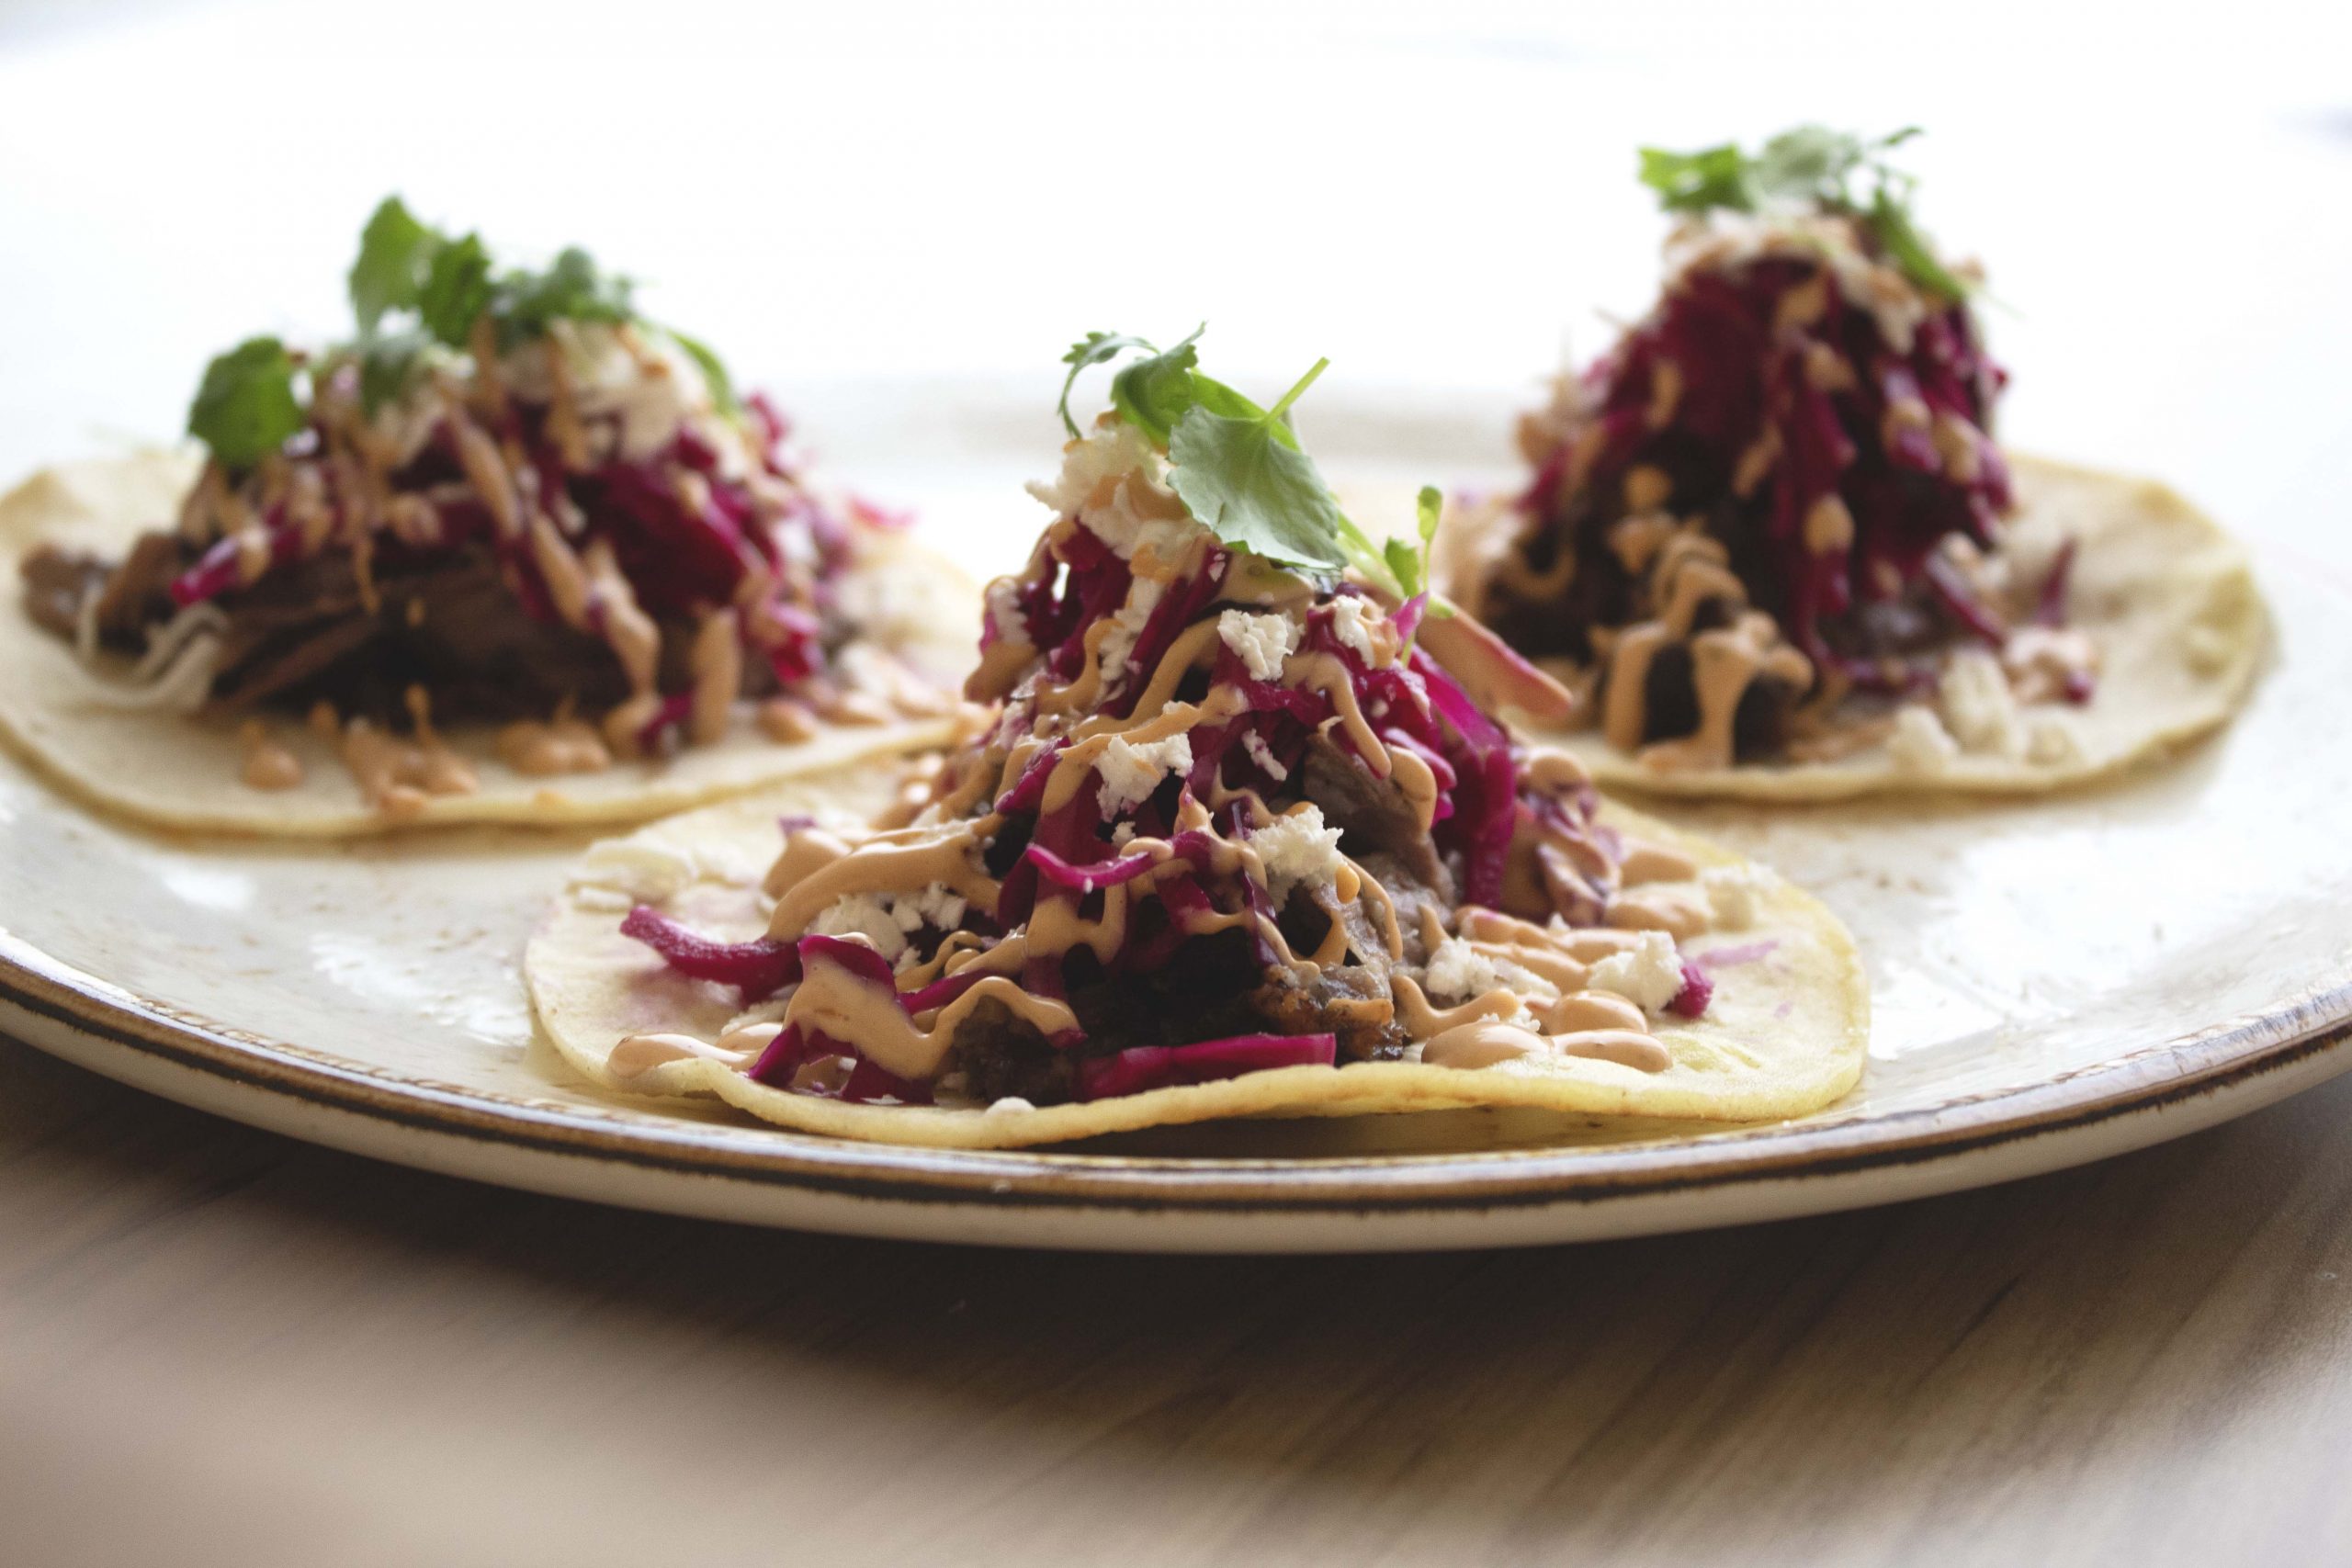 Plate of Beef Tacos